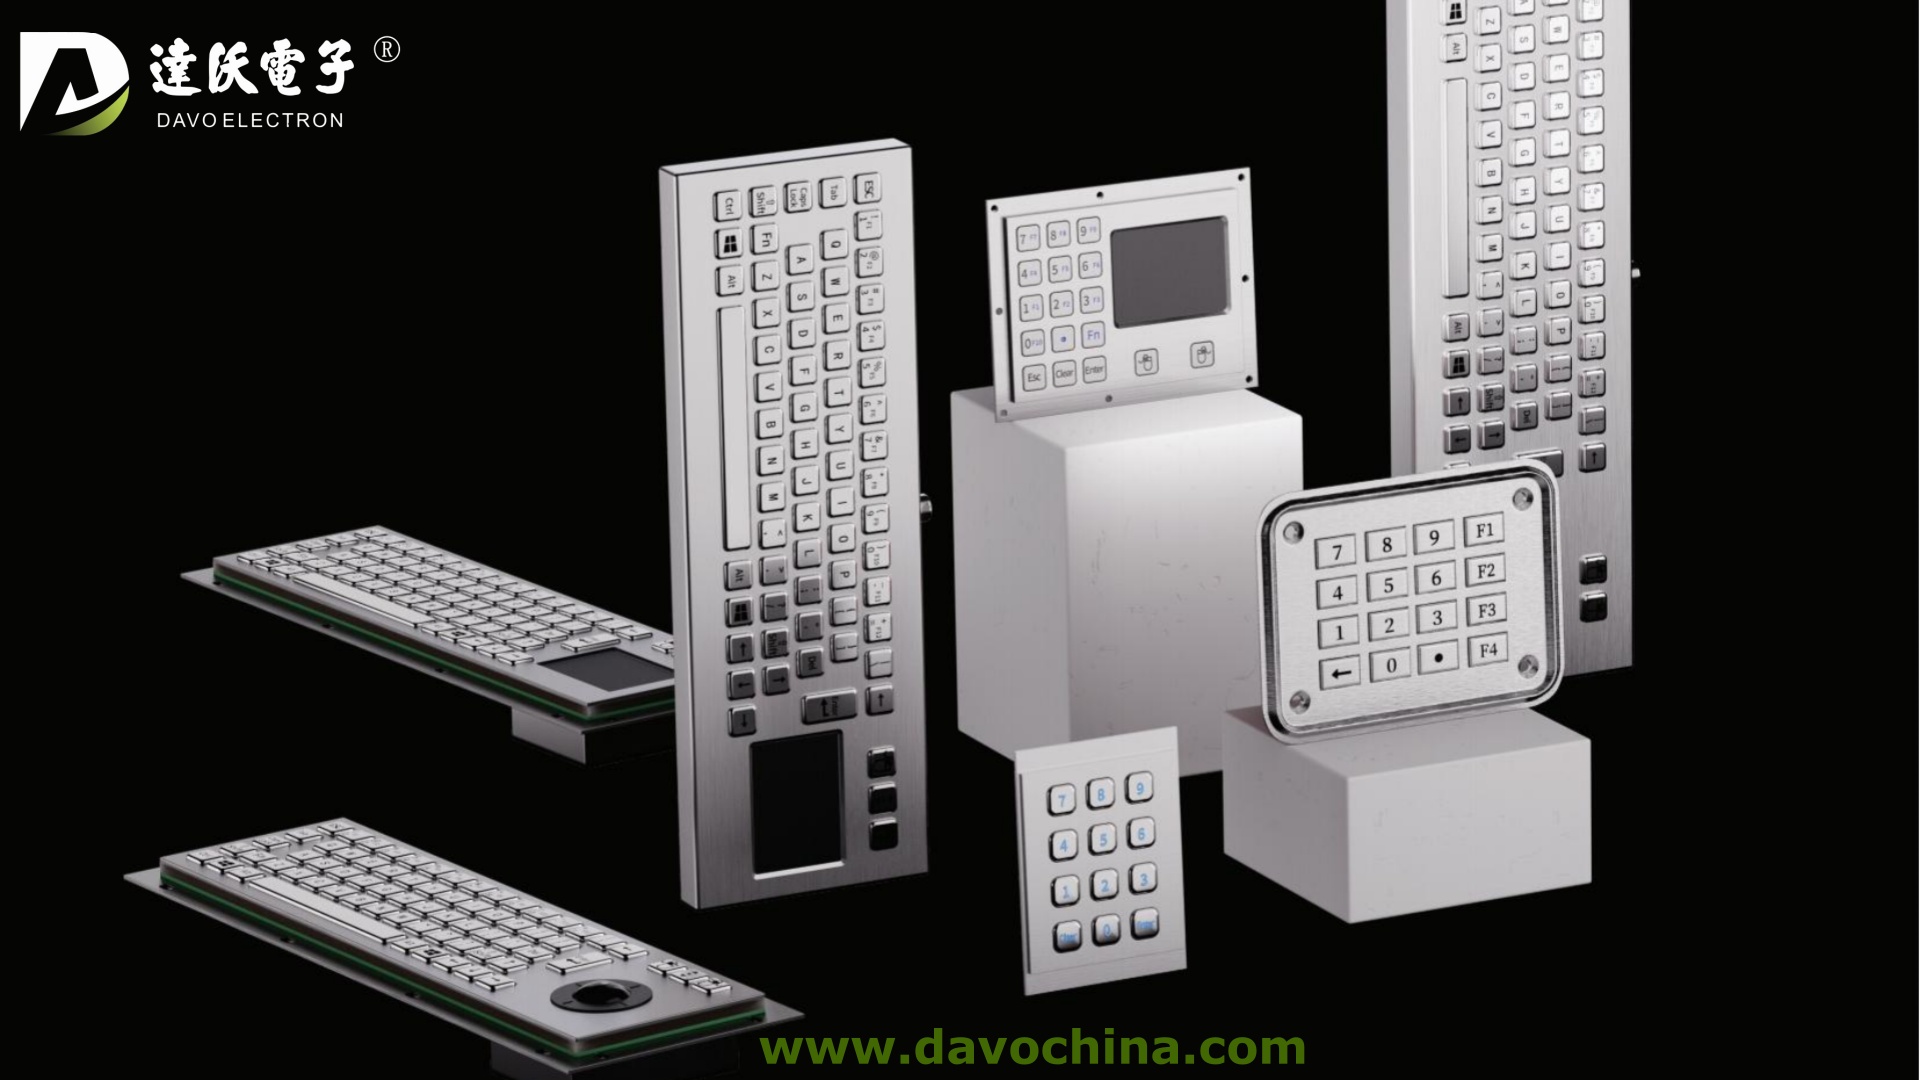 Revolutionizing Industrial Control Systems with DAVO Industrial Keyboards